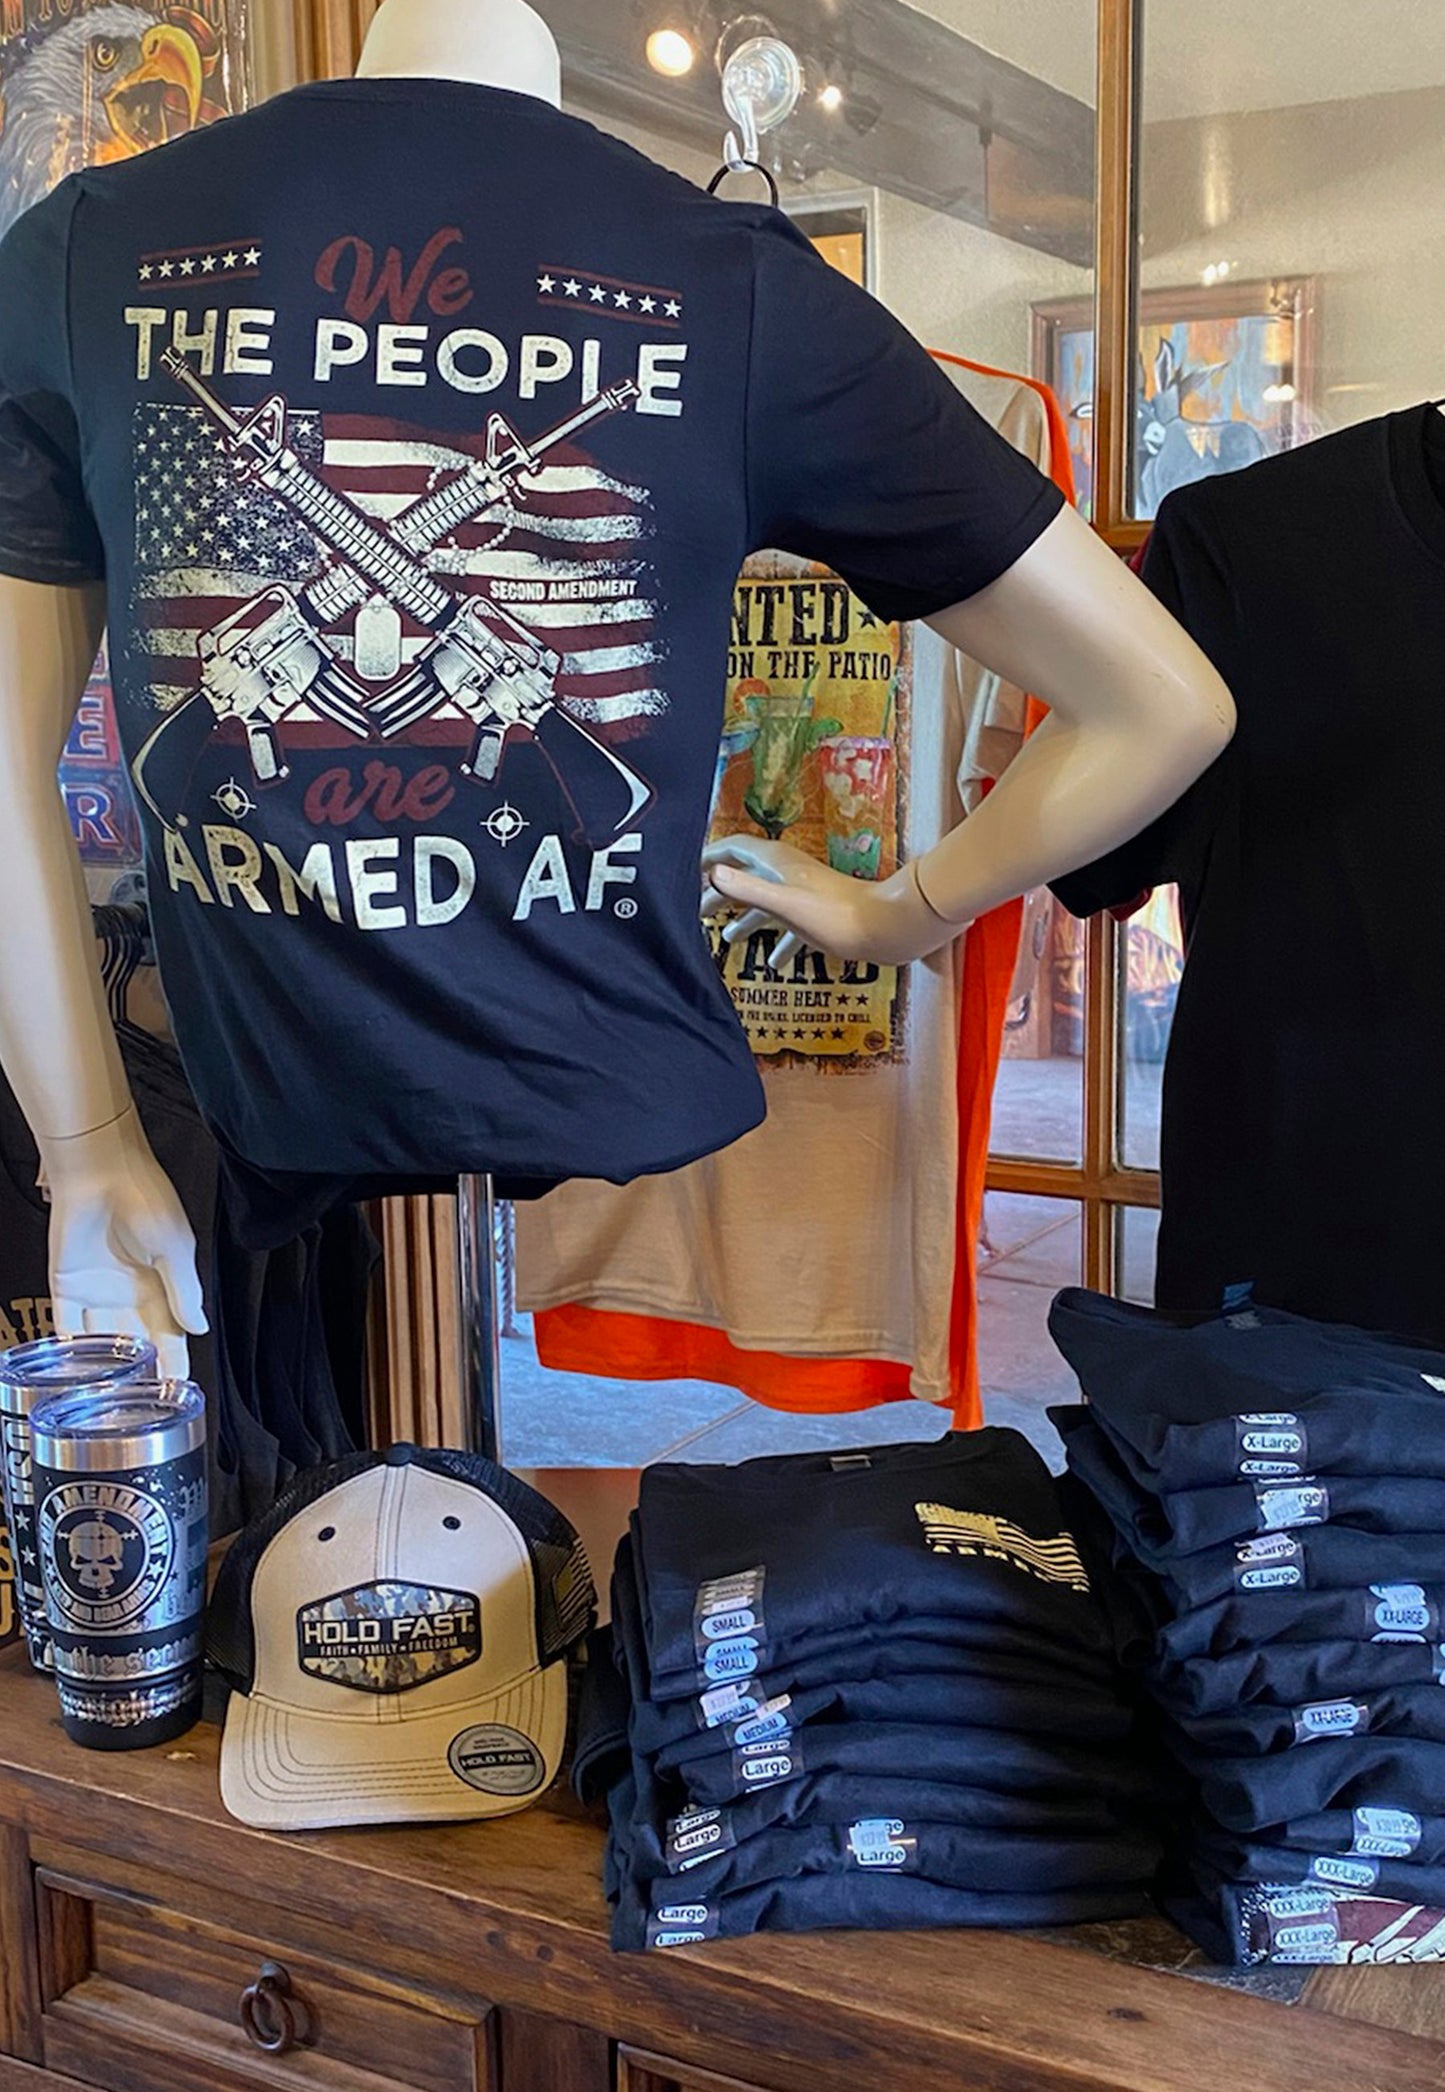 ArmedAF® brand t-shirt in retail store on display